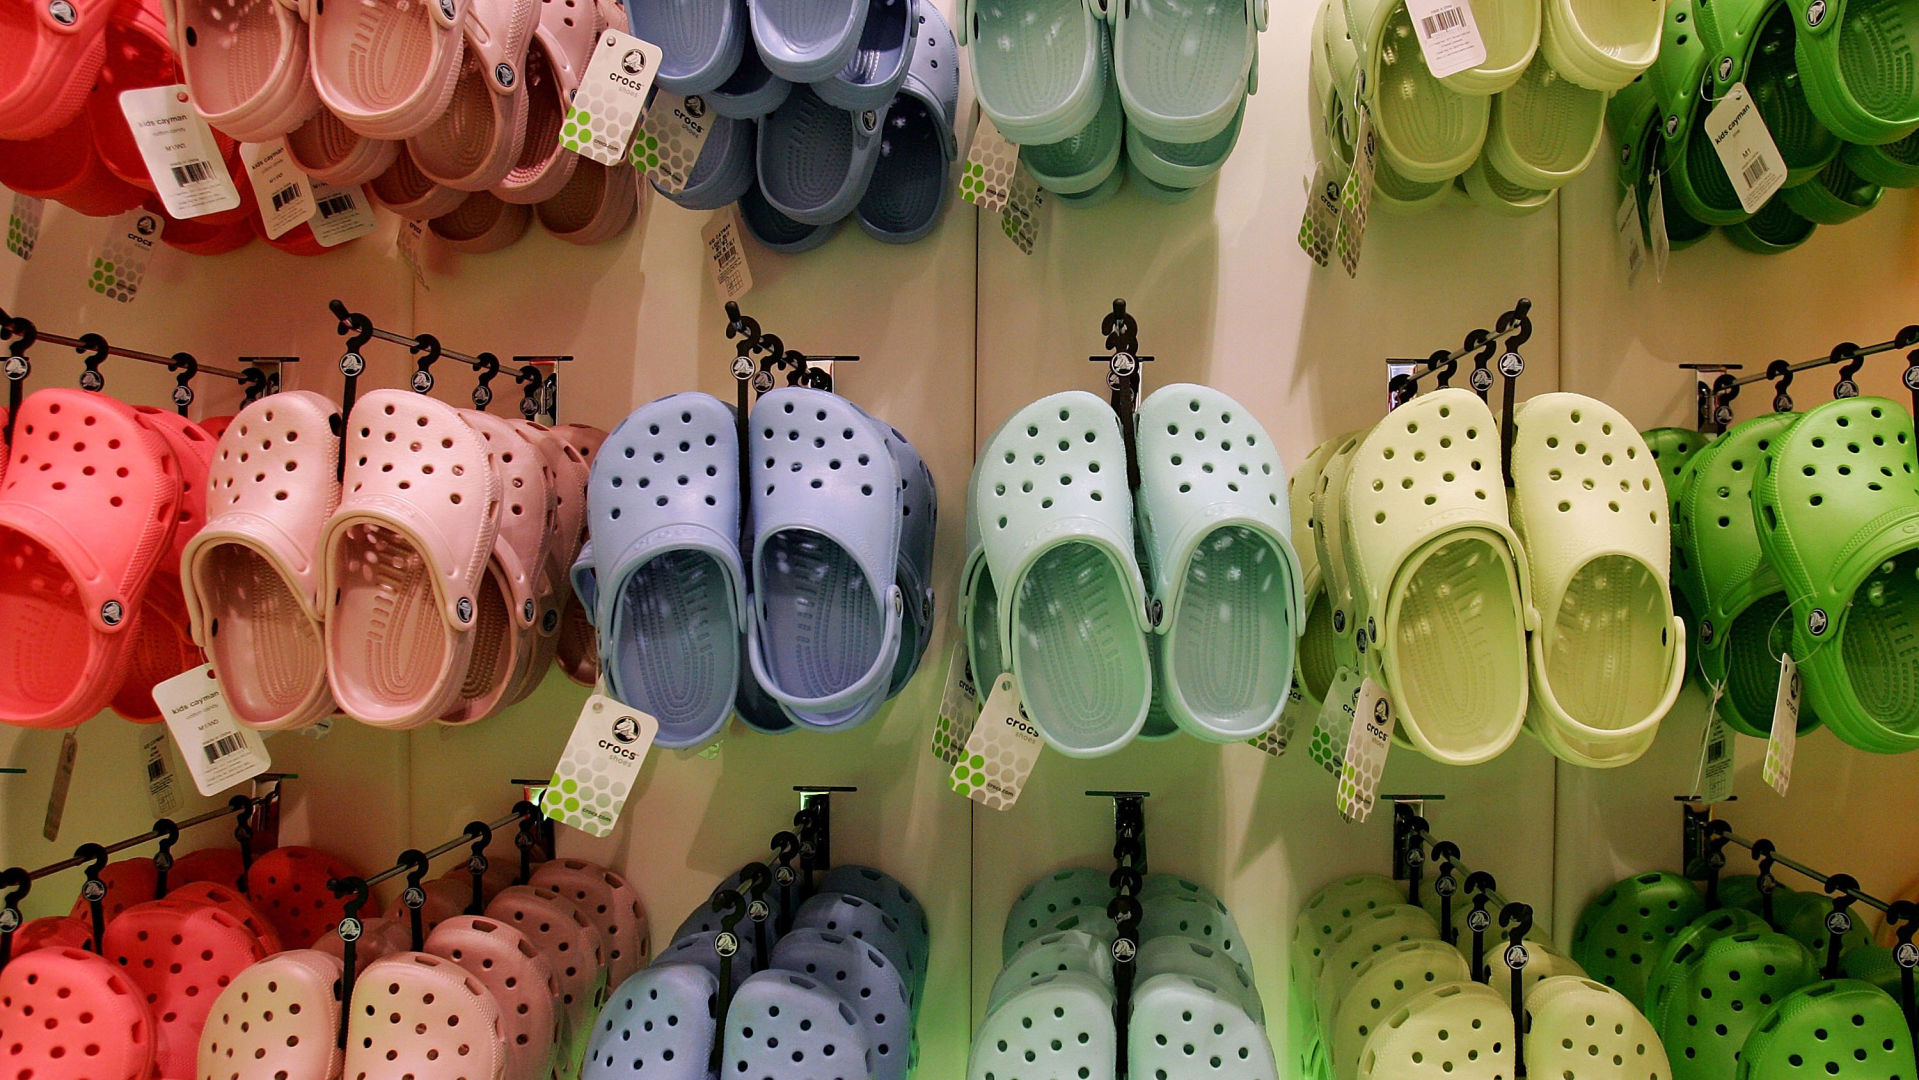 croc discount for healthcare workers